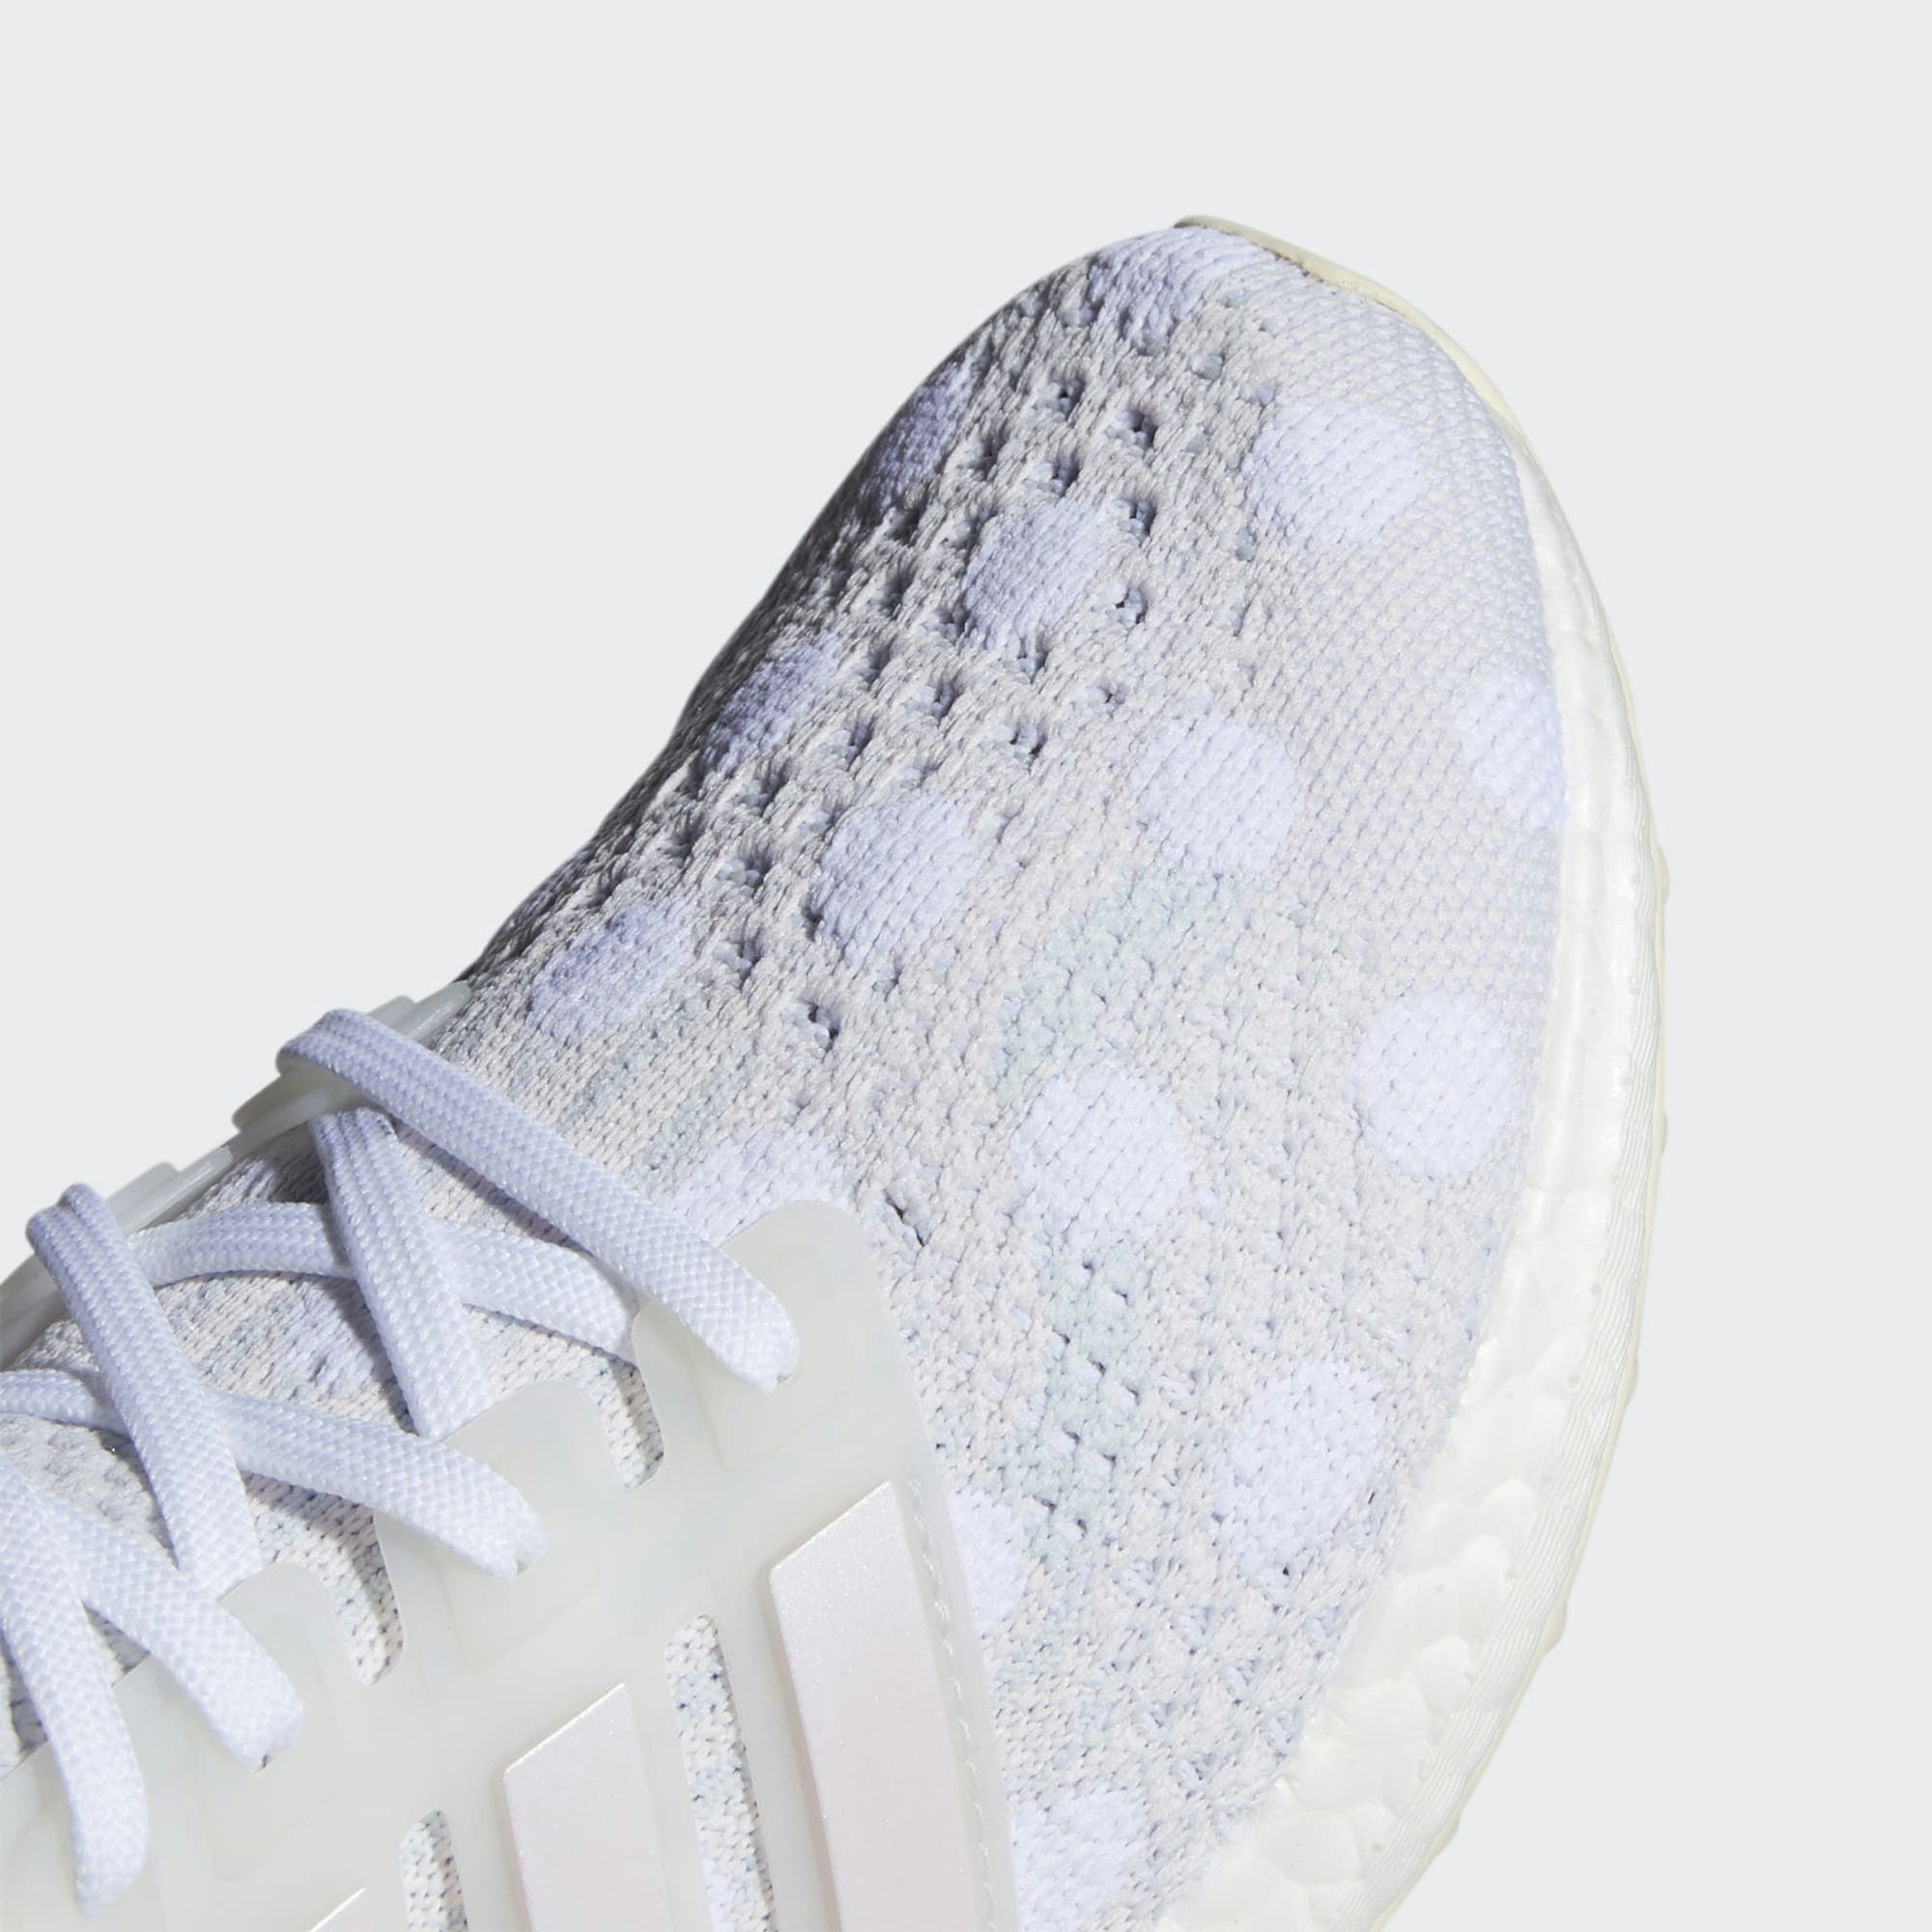 Parley x adidas Ultra Boost DNA "Cloud White"